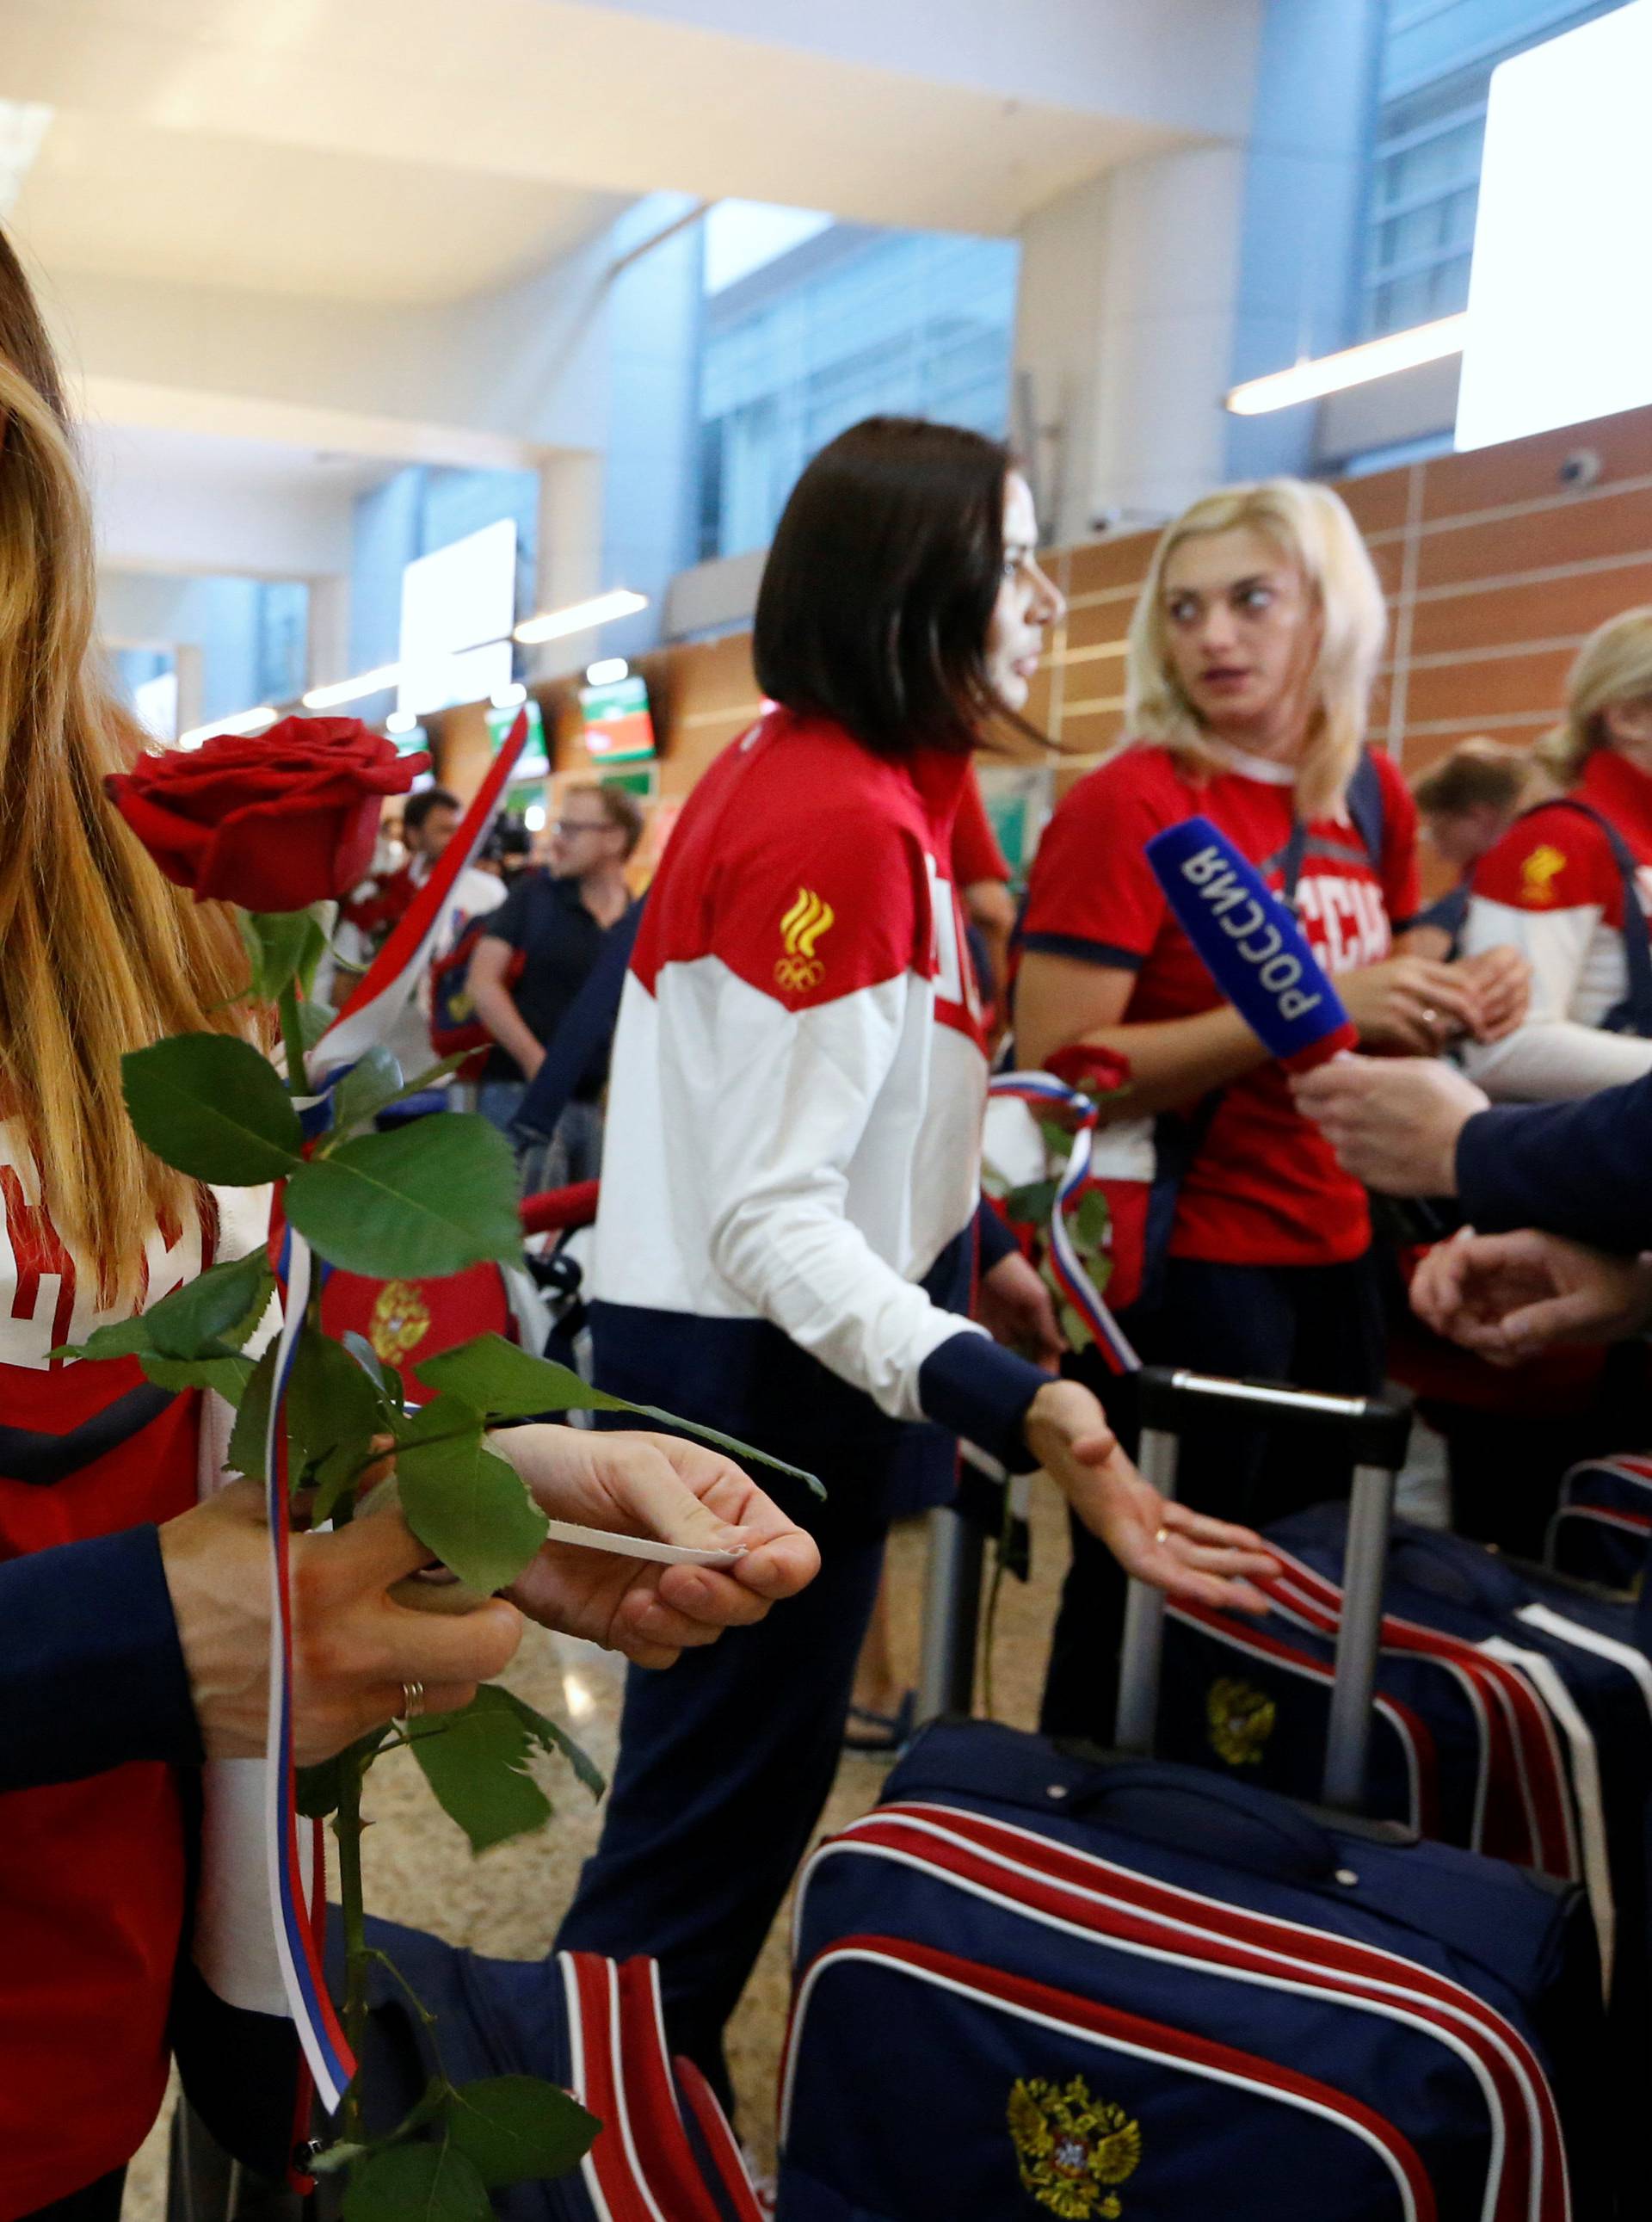 Russia's women's handball Olympic team member Sudakova waits for check-in before national team's departure to 2016 Rio Olympics at Sheremetyevo Airport outside Moscow